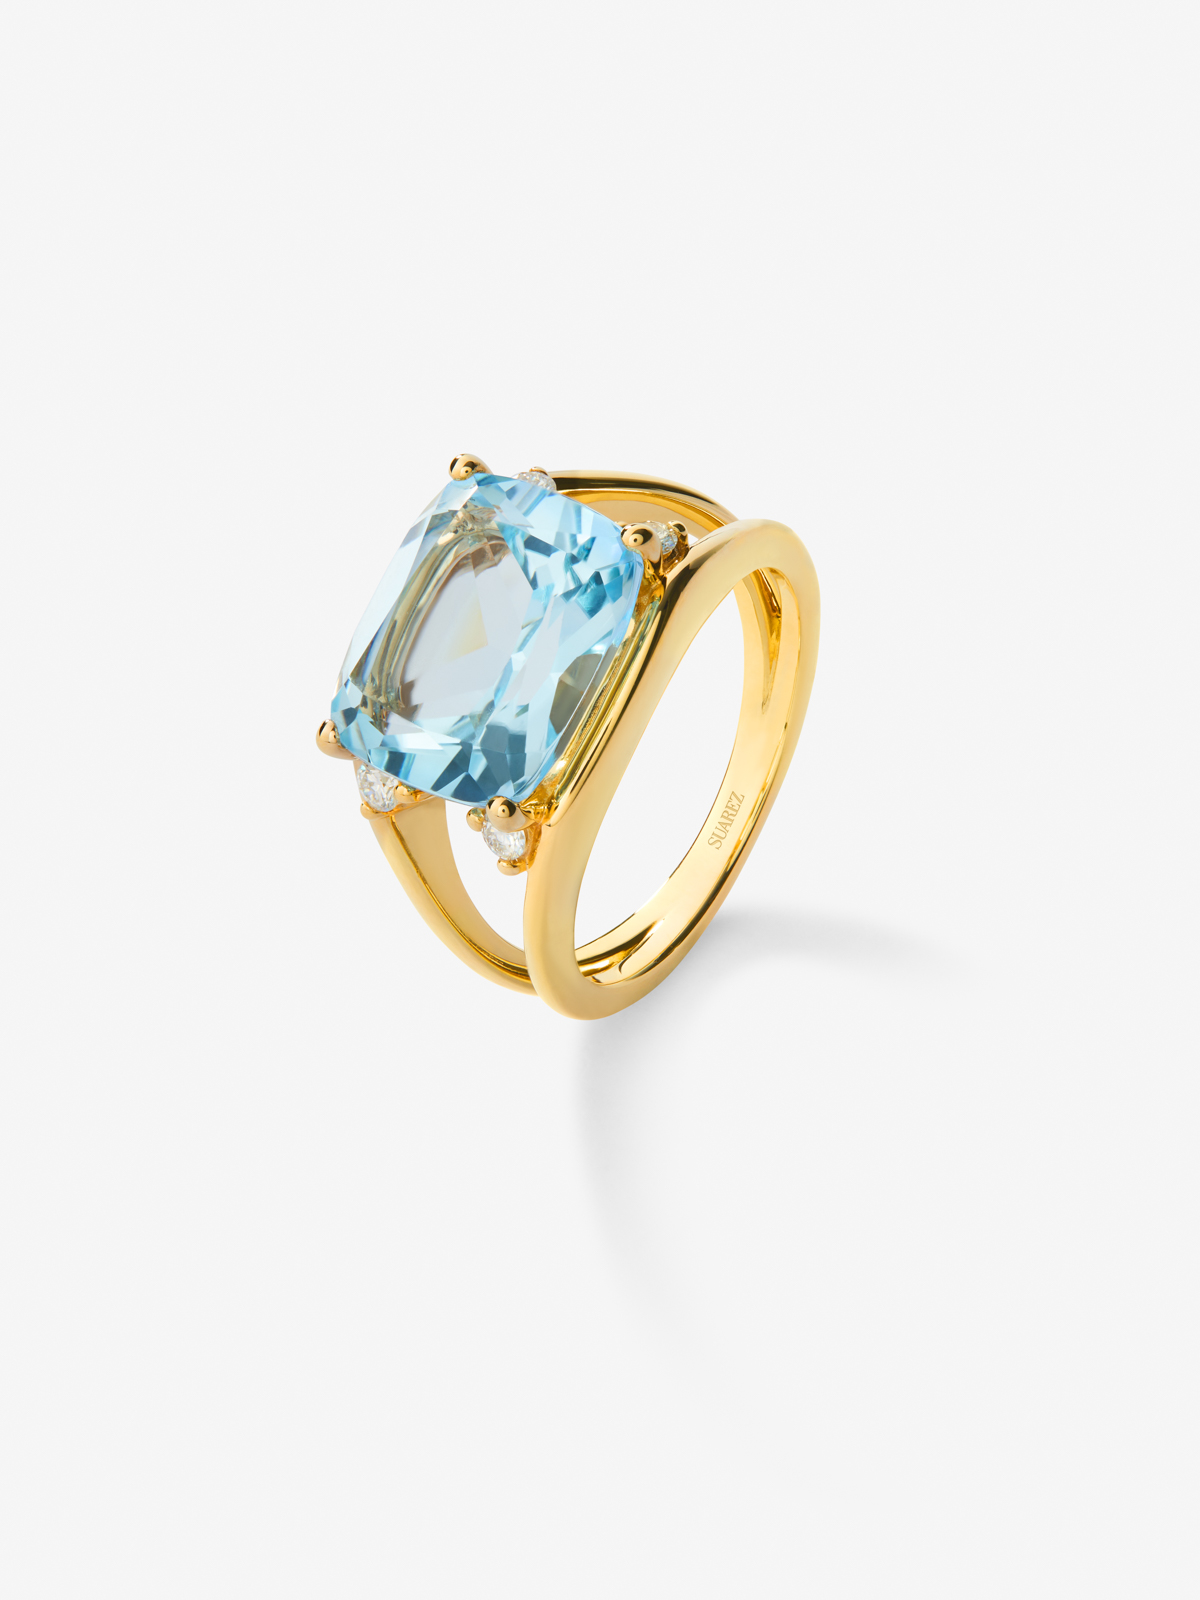 18k yellow gold ring with blue Sky Topacio in 7.3 cshion size and white diamonds in 0.13 cts bright diamonds